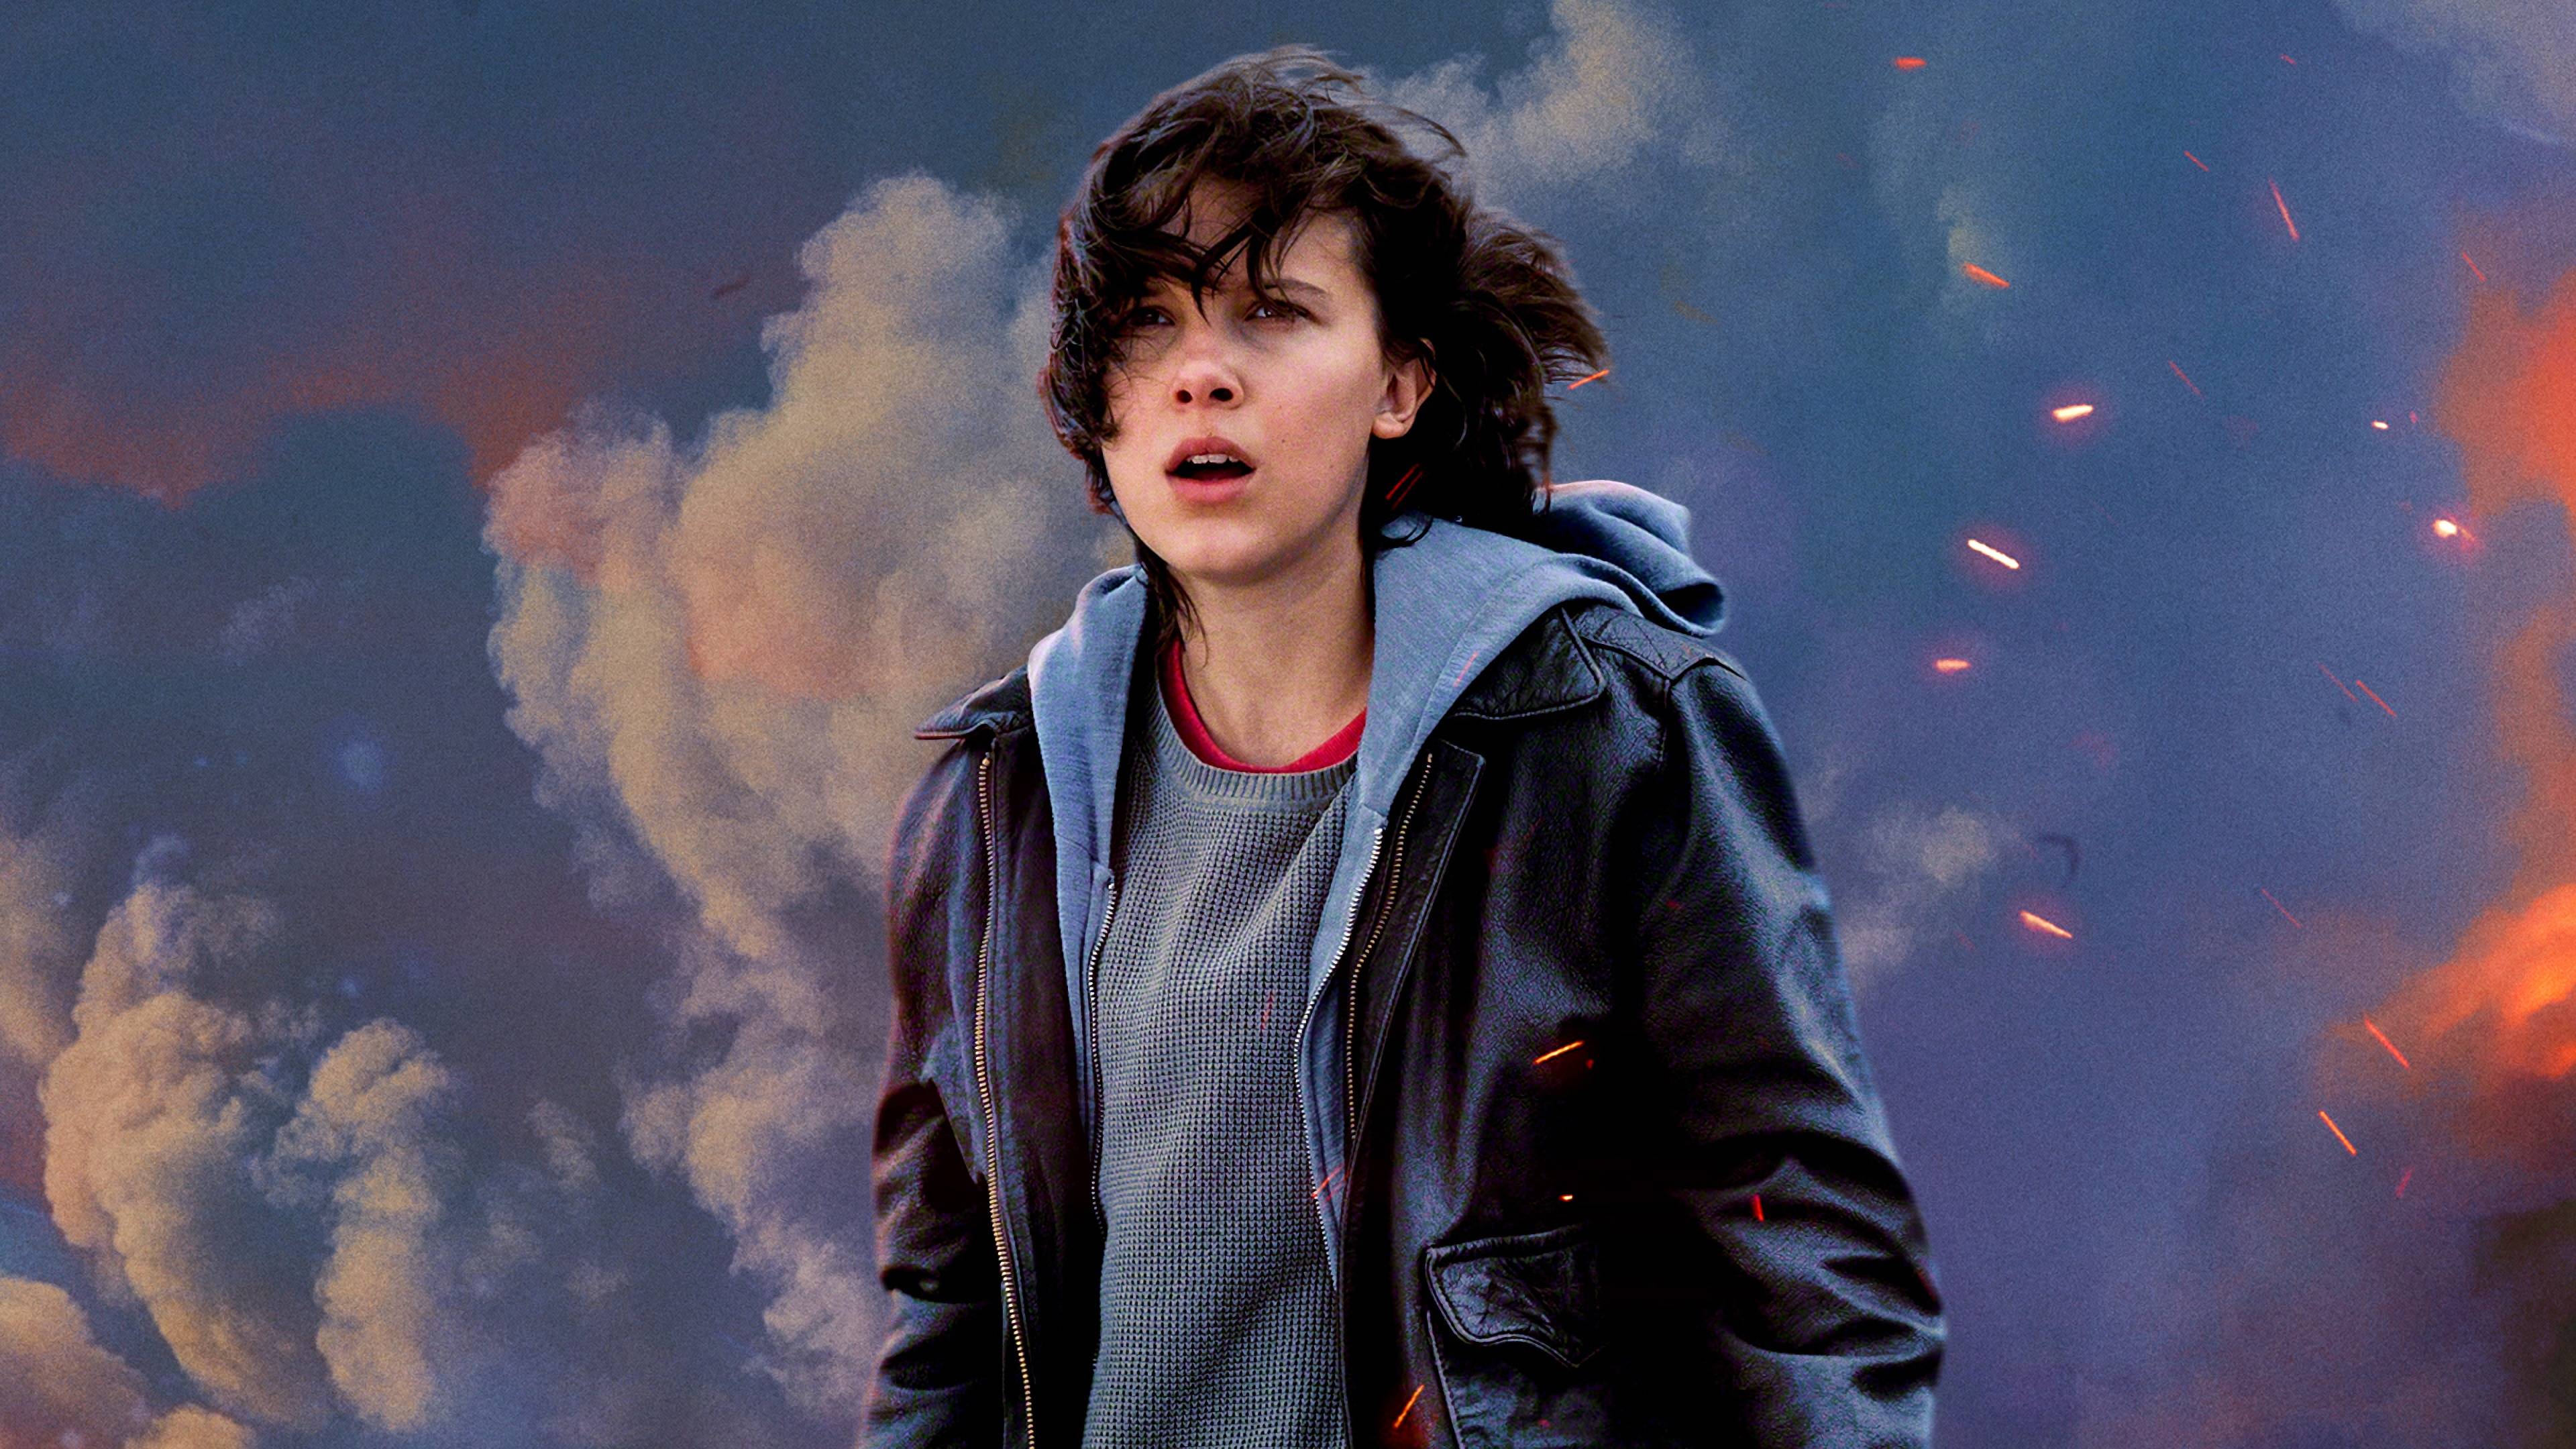 Godzilla: King of the Monsters Millie Bobby Brown 4K